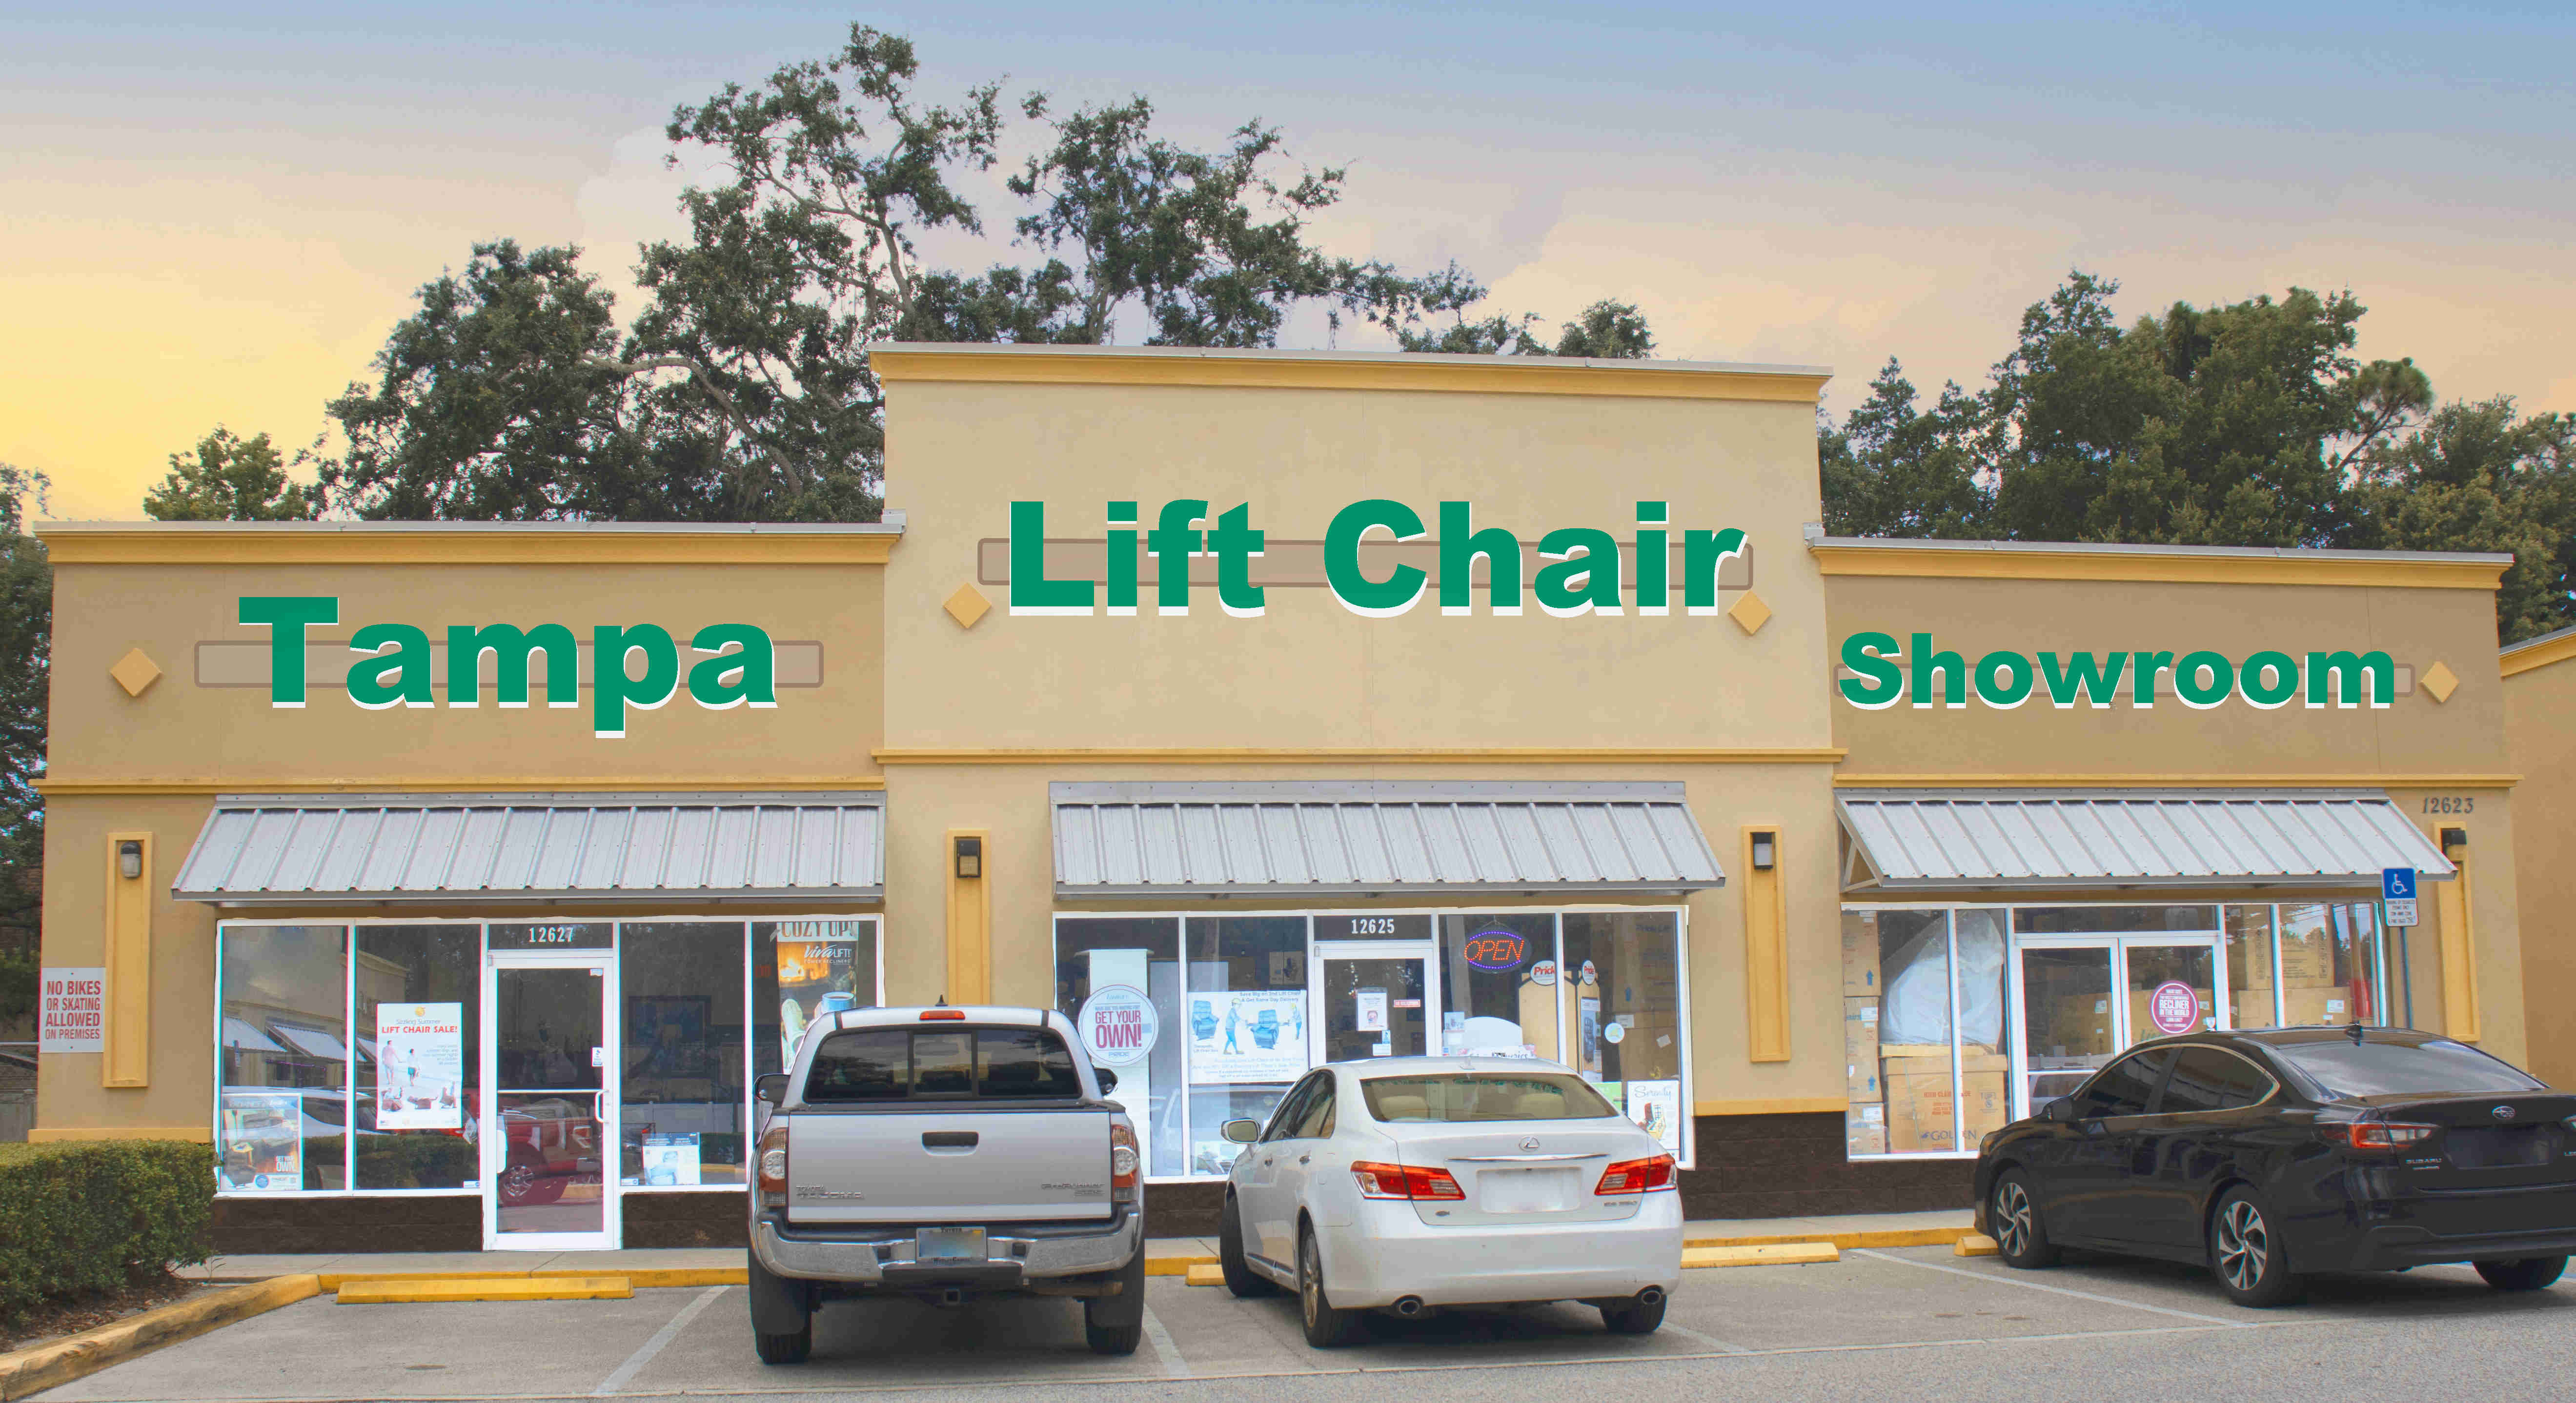 Photo of the Tampa Lift Chair Showroom store front.